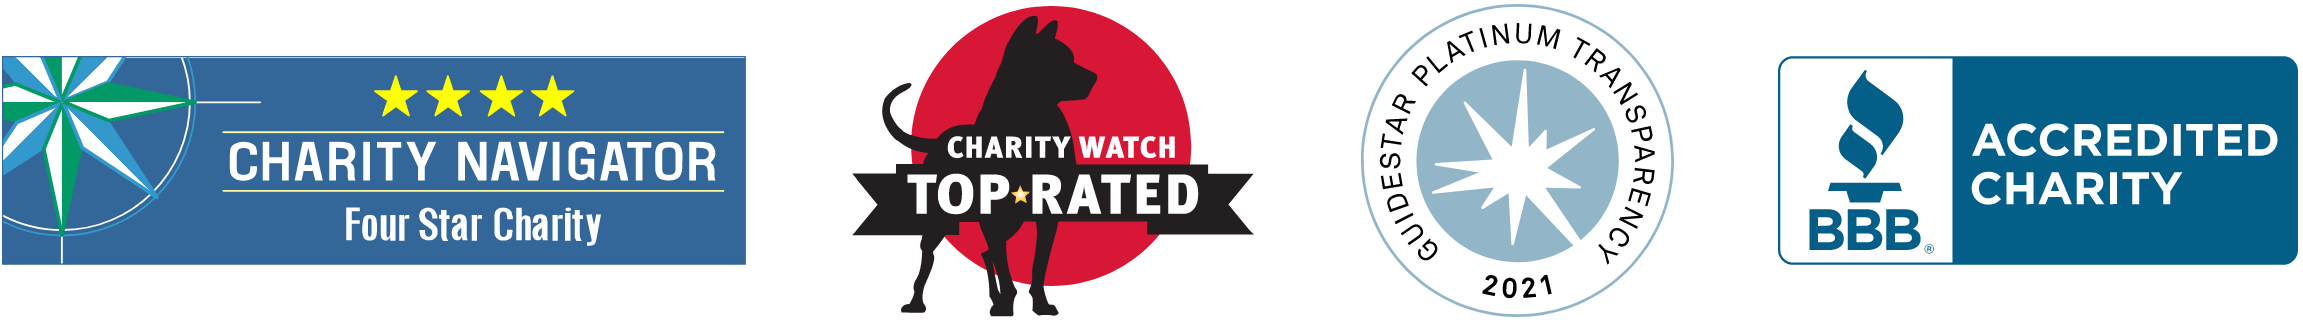 Charity Navigator 4 stars, Charity Watch top rated, Guidestar platinum, BBB accredited